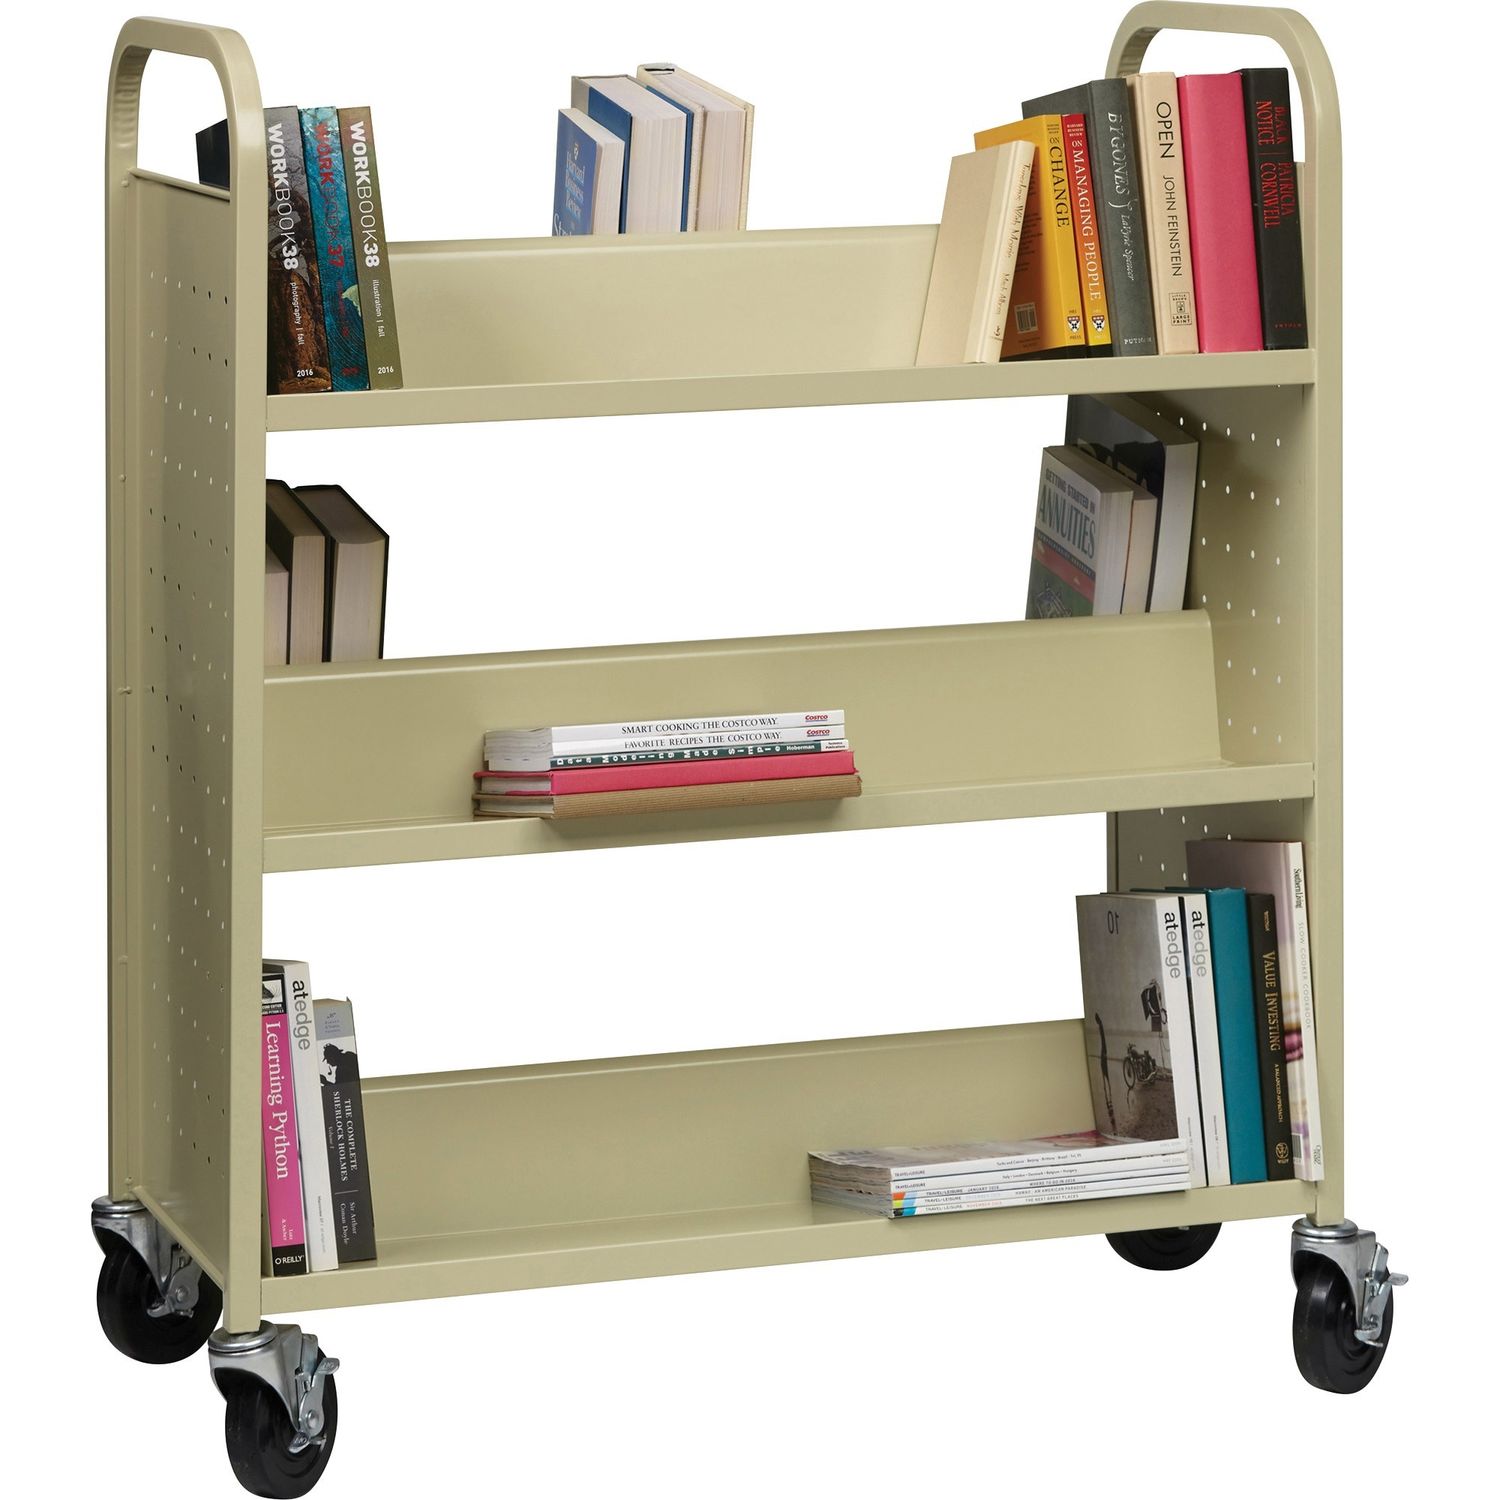 Double-sided Book Cart 6 Shelf, 200 lb Capacity, 5" Caster Size, Steel, x 36" Width x 19" Depth x 46" Height, Putty, 1 Each